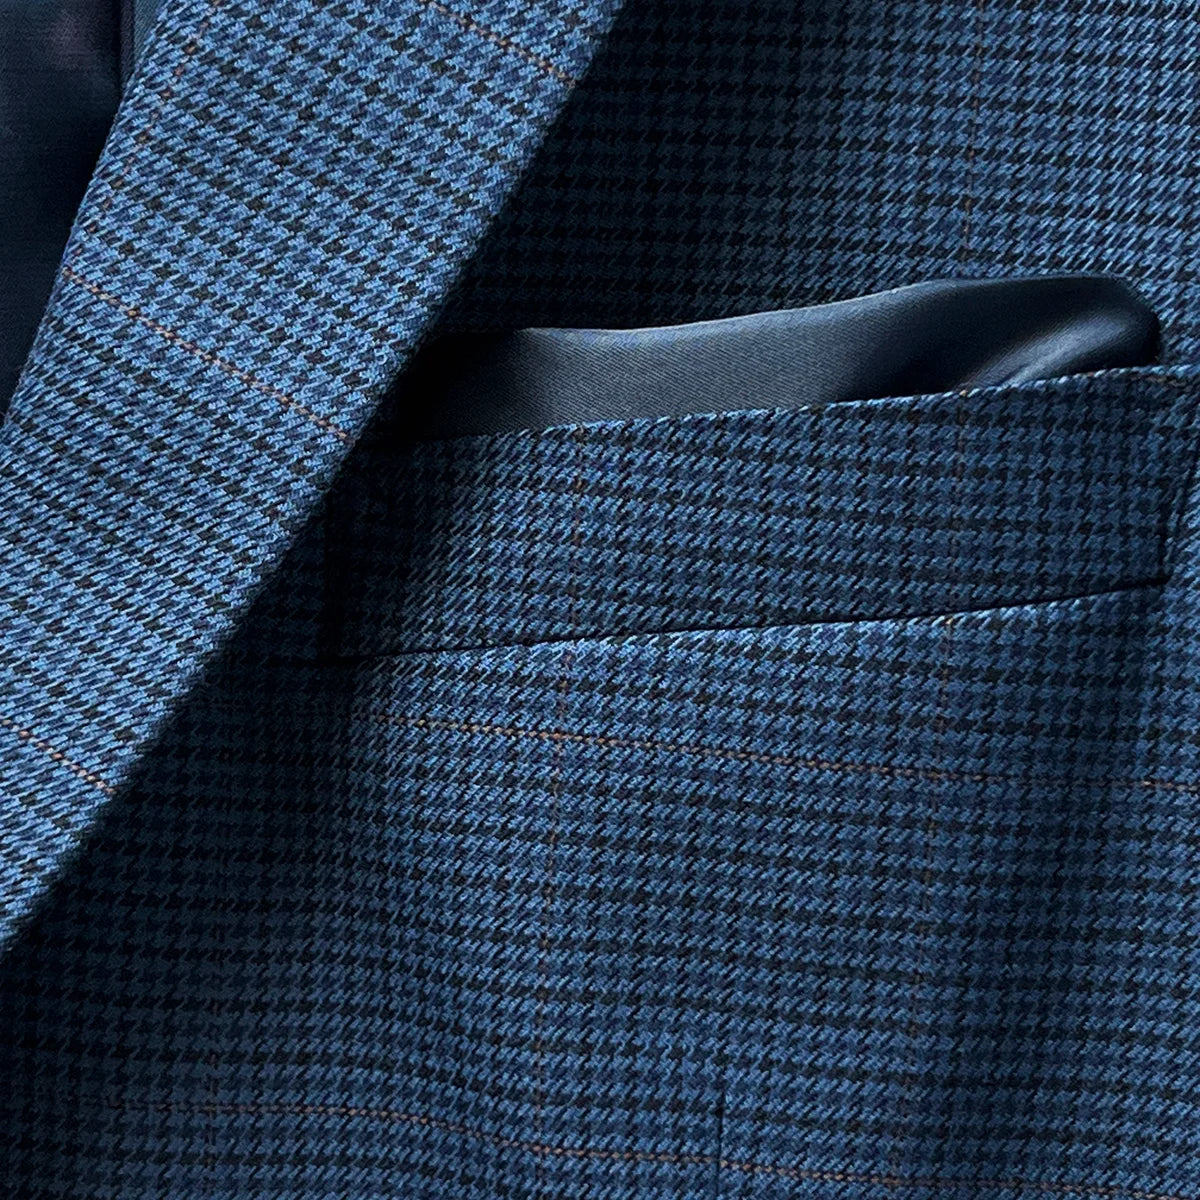 Built-in pocket square detail on the prussian blue suit jacket, adding a touch of elegance and practicality.